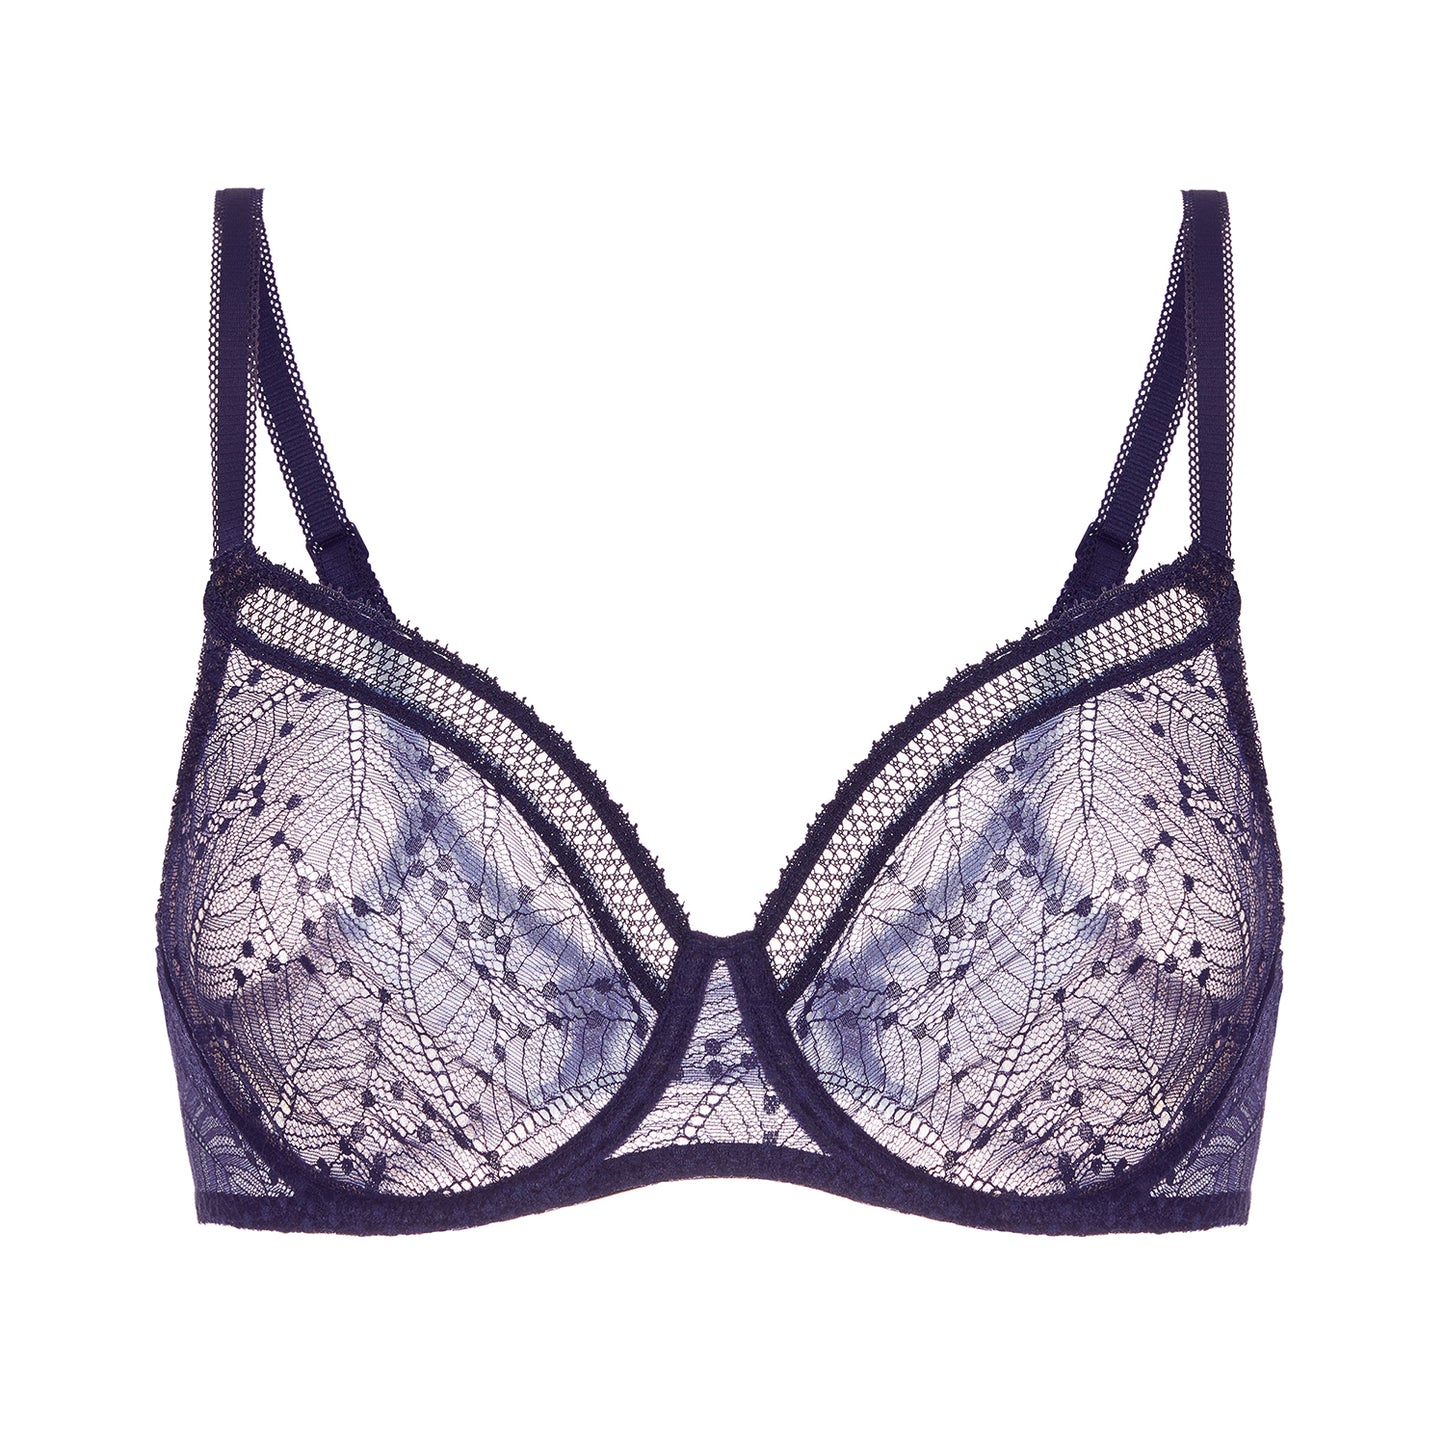 Lace push-up bra Prelude All About Eve